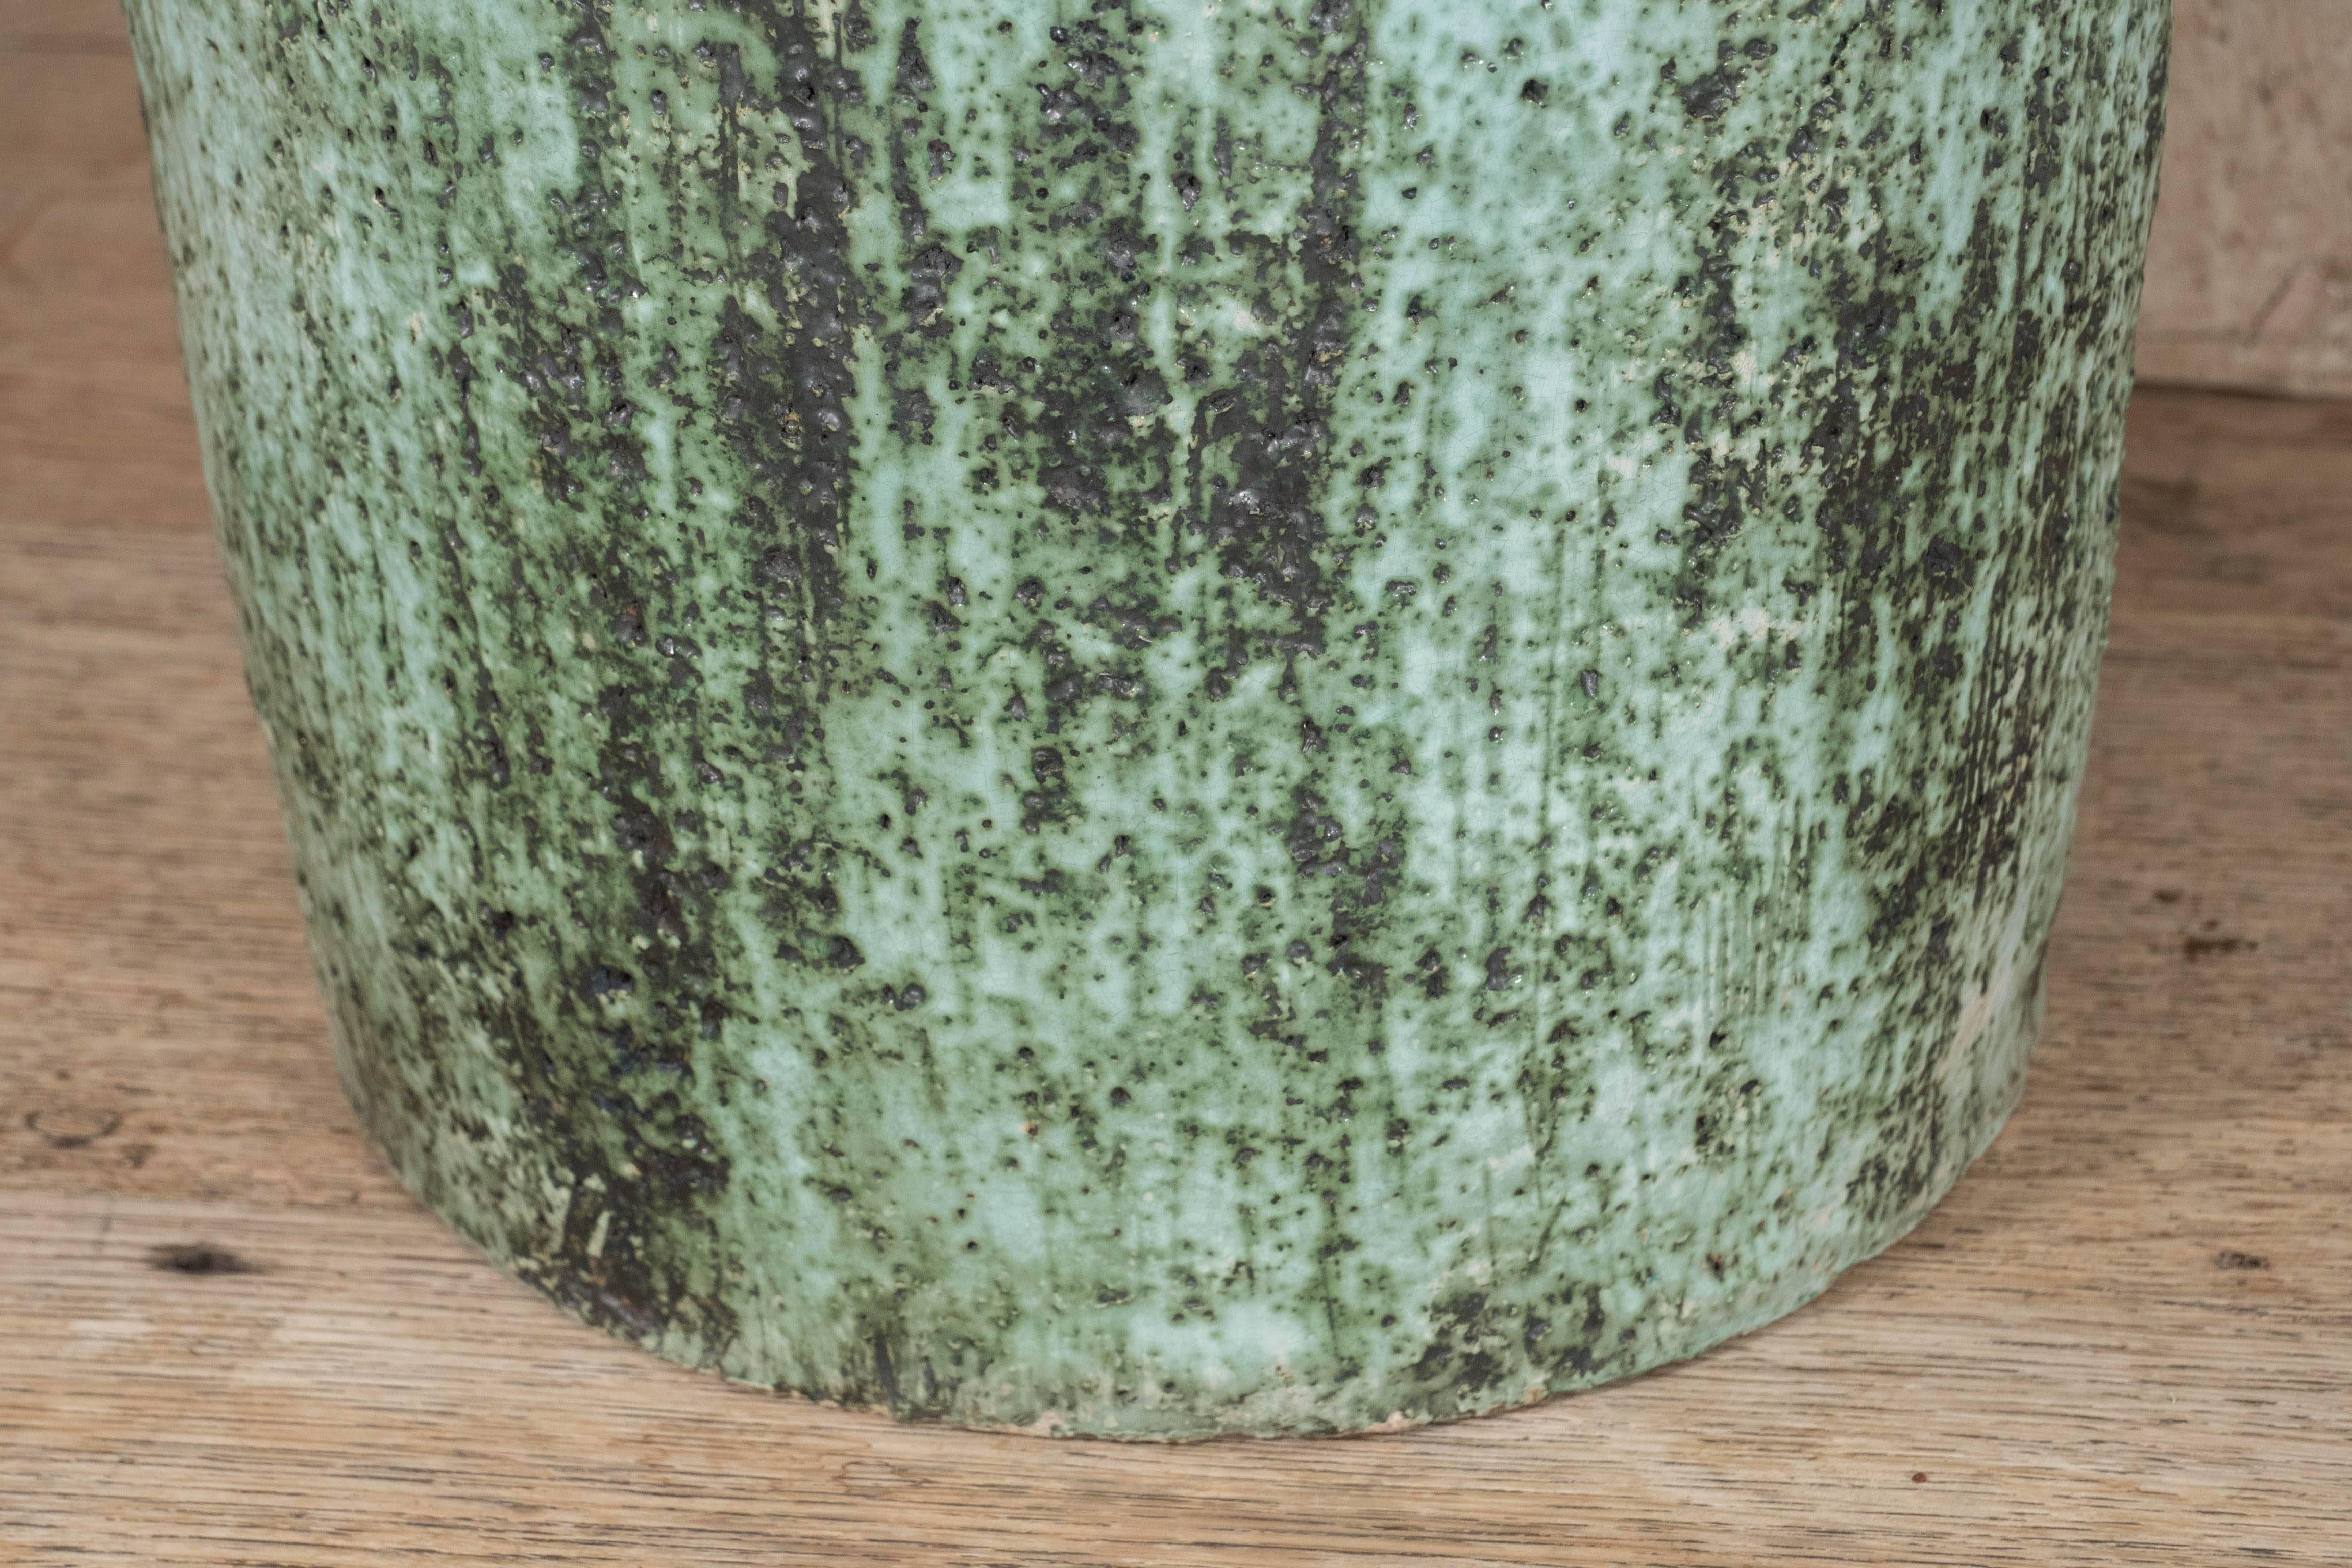 A great looking French ceramic vase with handles in a unique, textured green and white glaze.  Produced by Accolay, Ca. 1950s.

